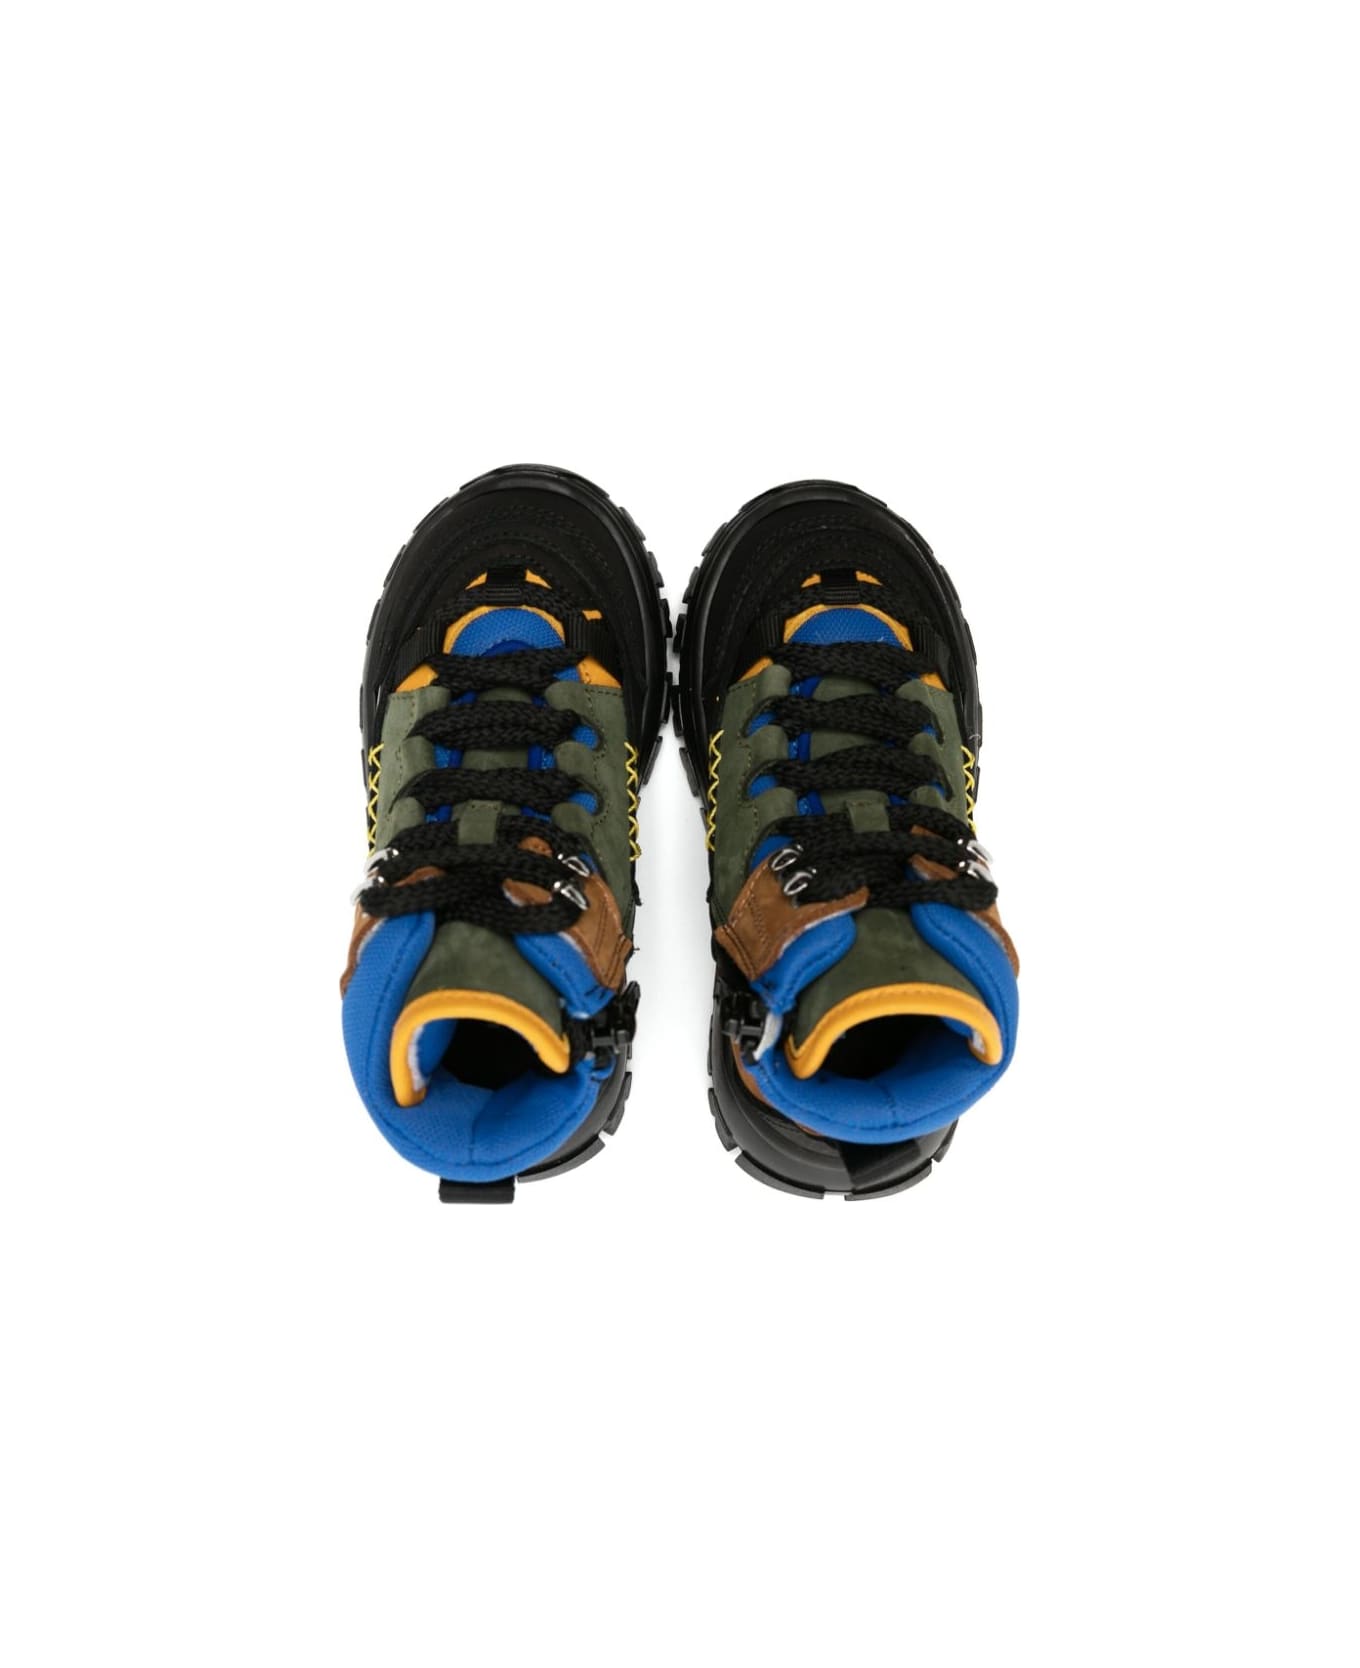 Dsquared2 Sneakers With Laces - Multicolor シューズ